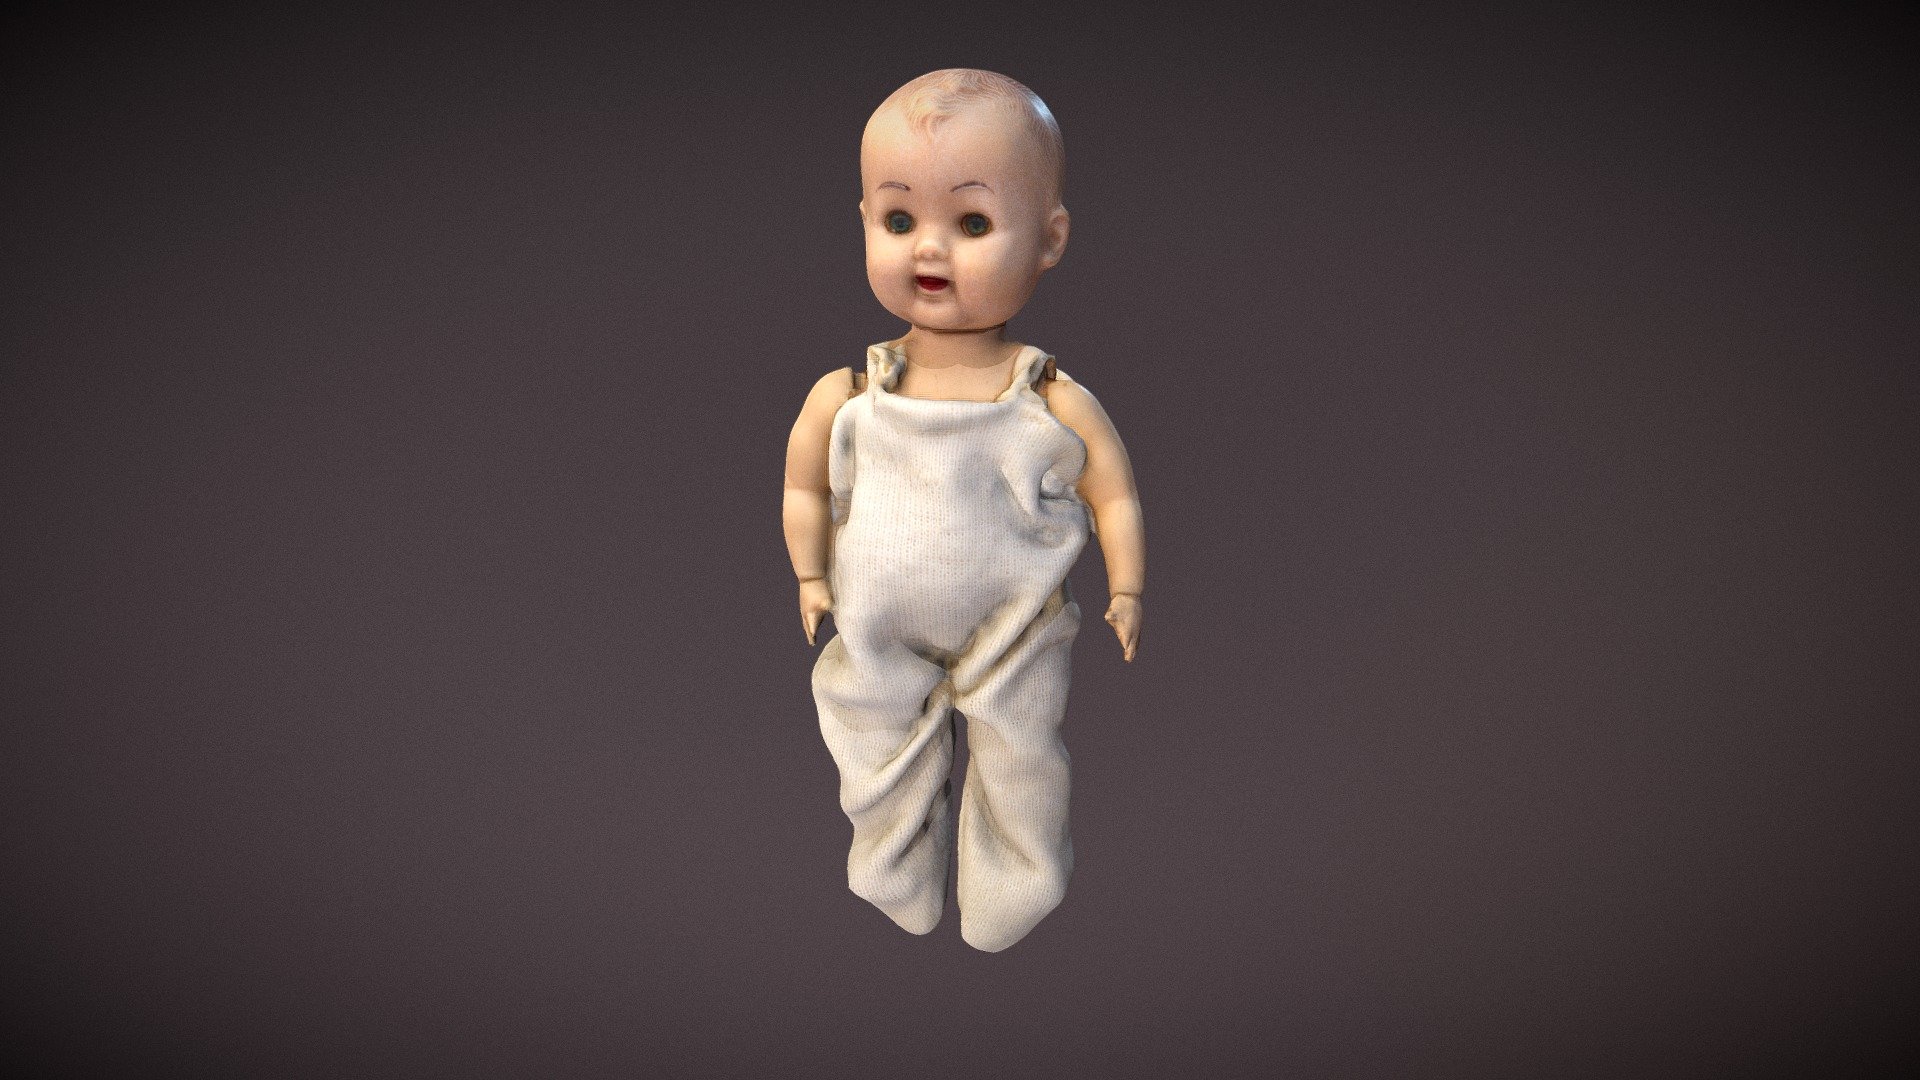 A creepy little doll that i found at my mothers attic. The arms are dismembered, tied together with an rubber band inside. Photogrammetry with Photoscan, cleanup in Blender, retopology in Instant Meshes 3d model